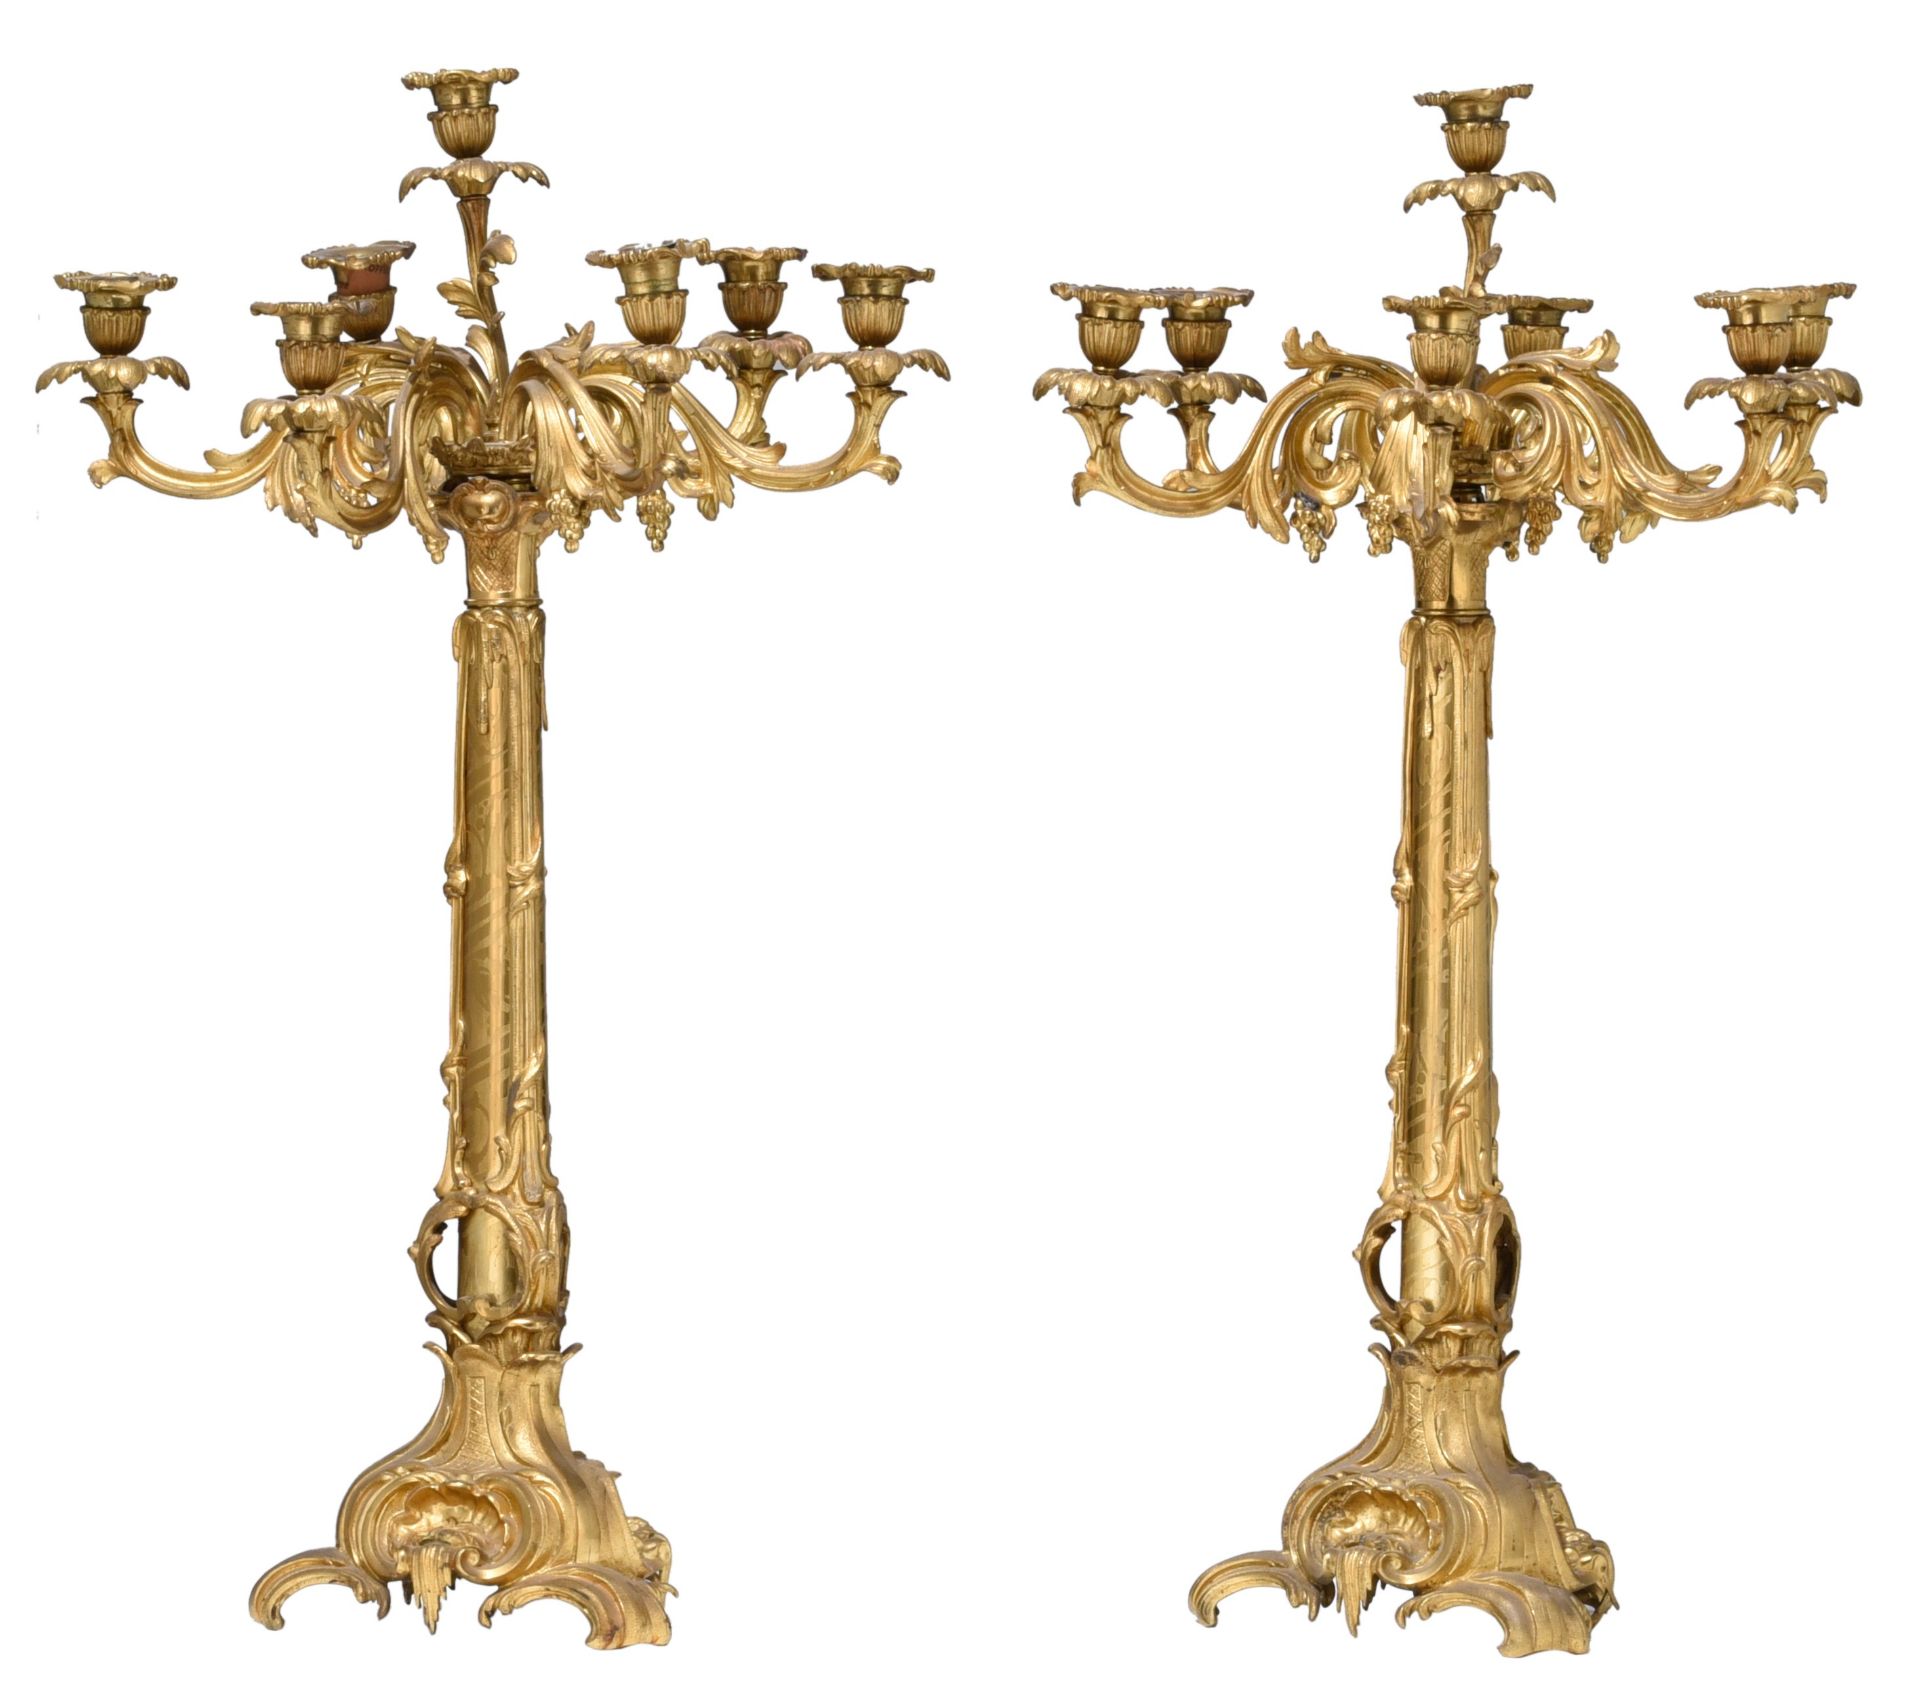 A large pair of Napoleon III gilt bronze candelabras and a matching coupe, H 74 - W 59 cm - Image 11 of 13